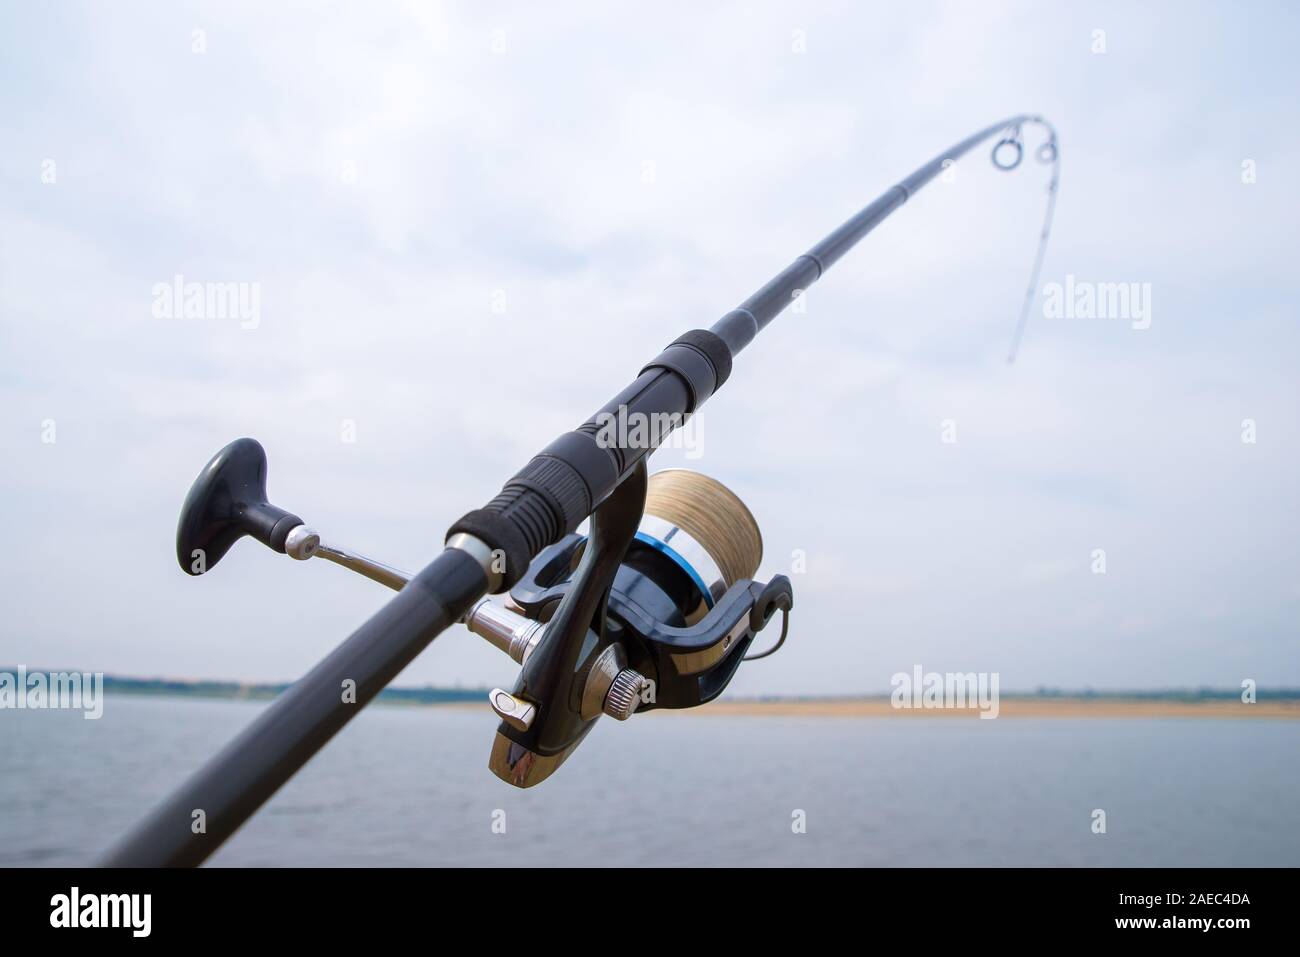 Fishing rod with reel close-up. The fishing rod is bent and fully